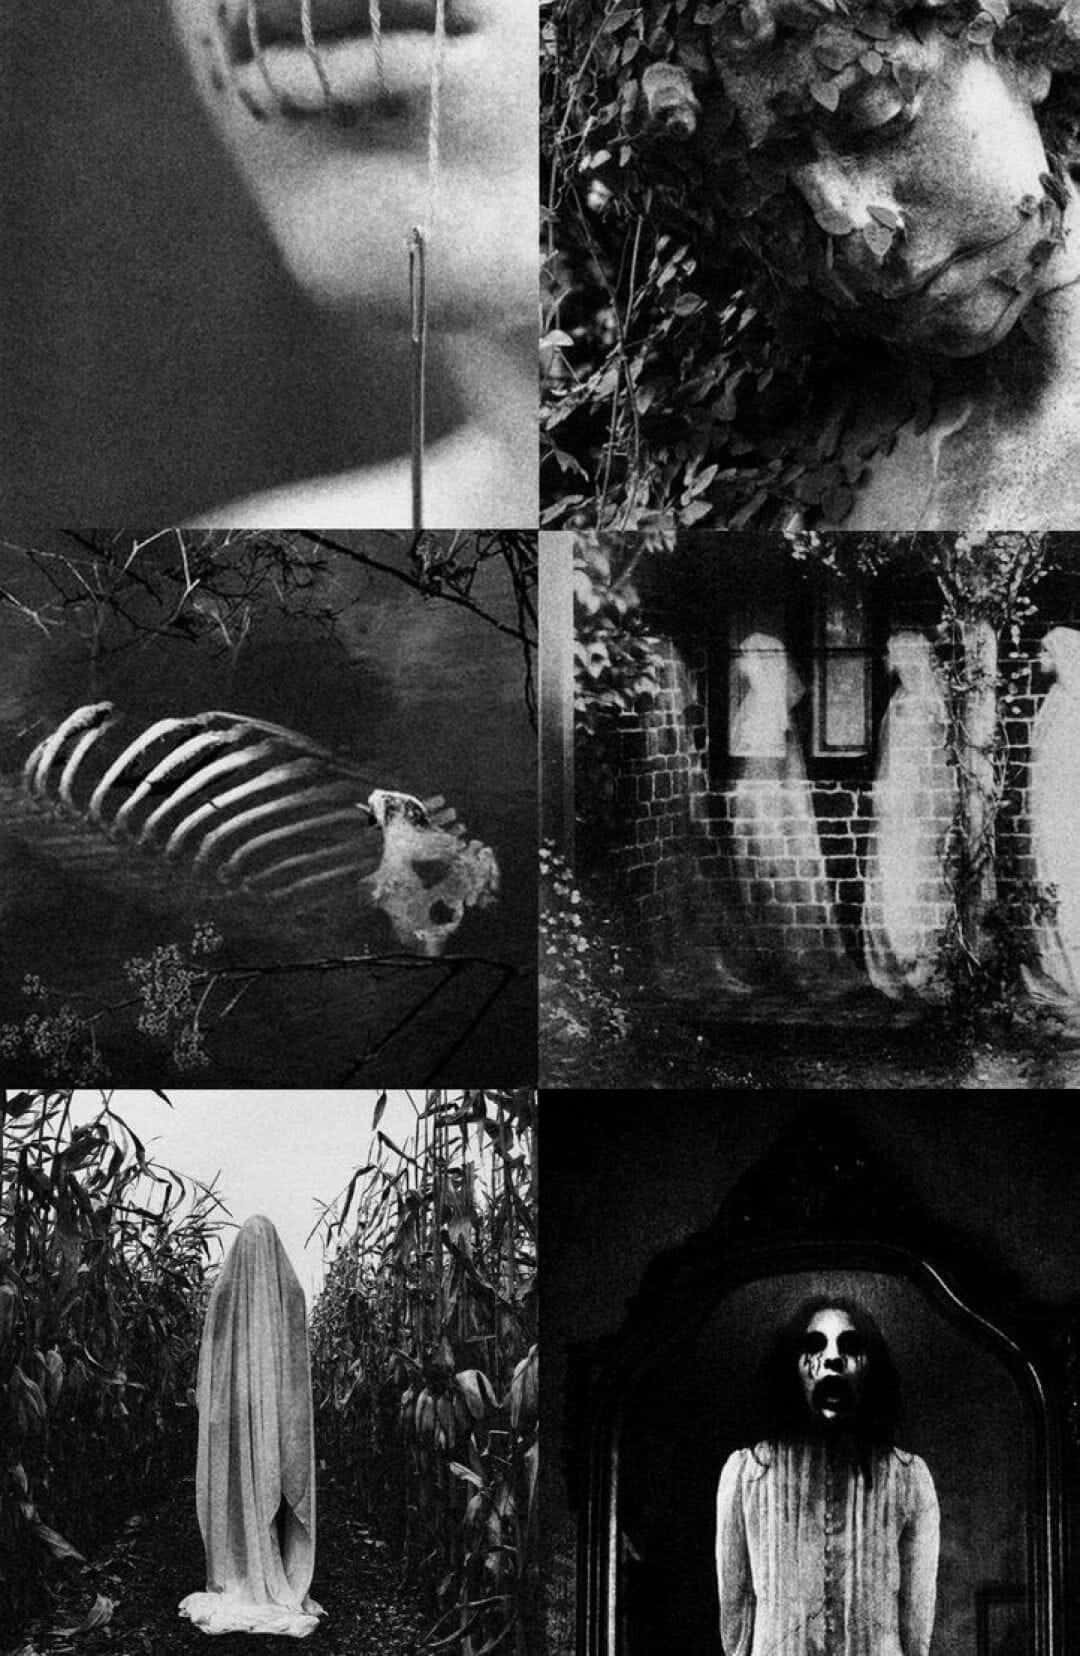 Aesthetic for the book series The Dark Cycle by Orson Scott Card - Horror, gothic